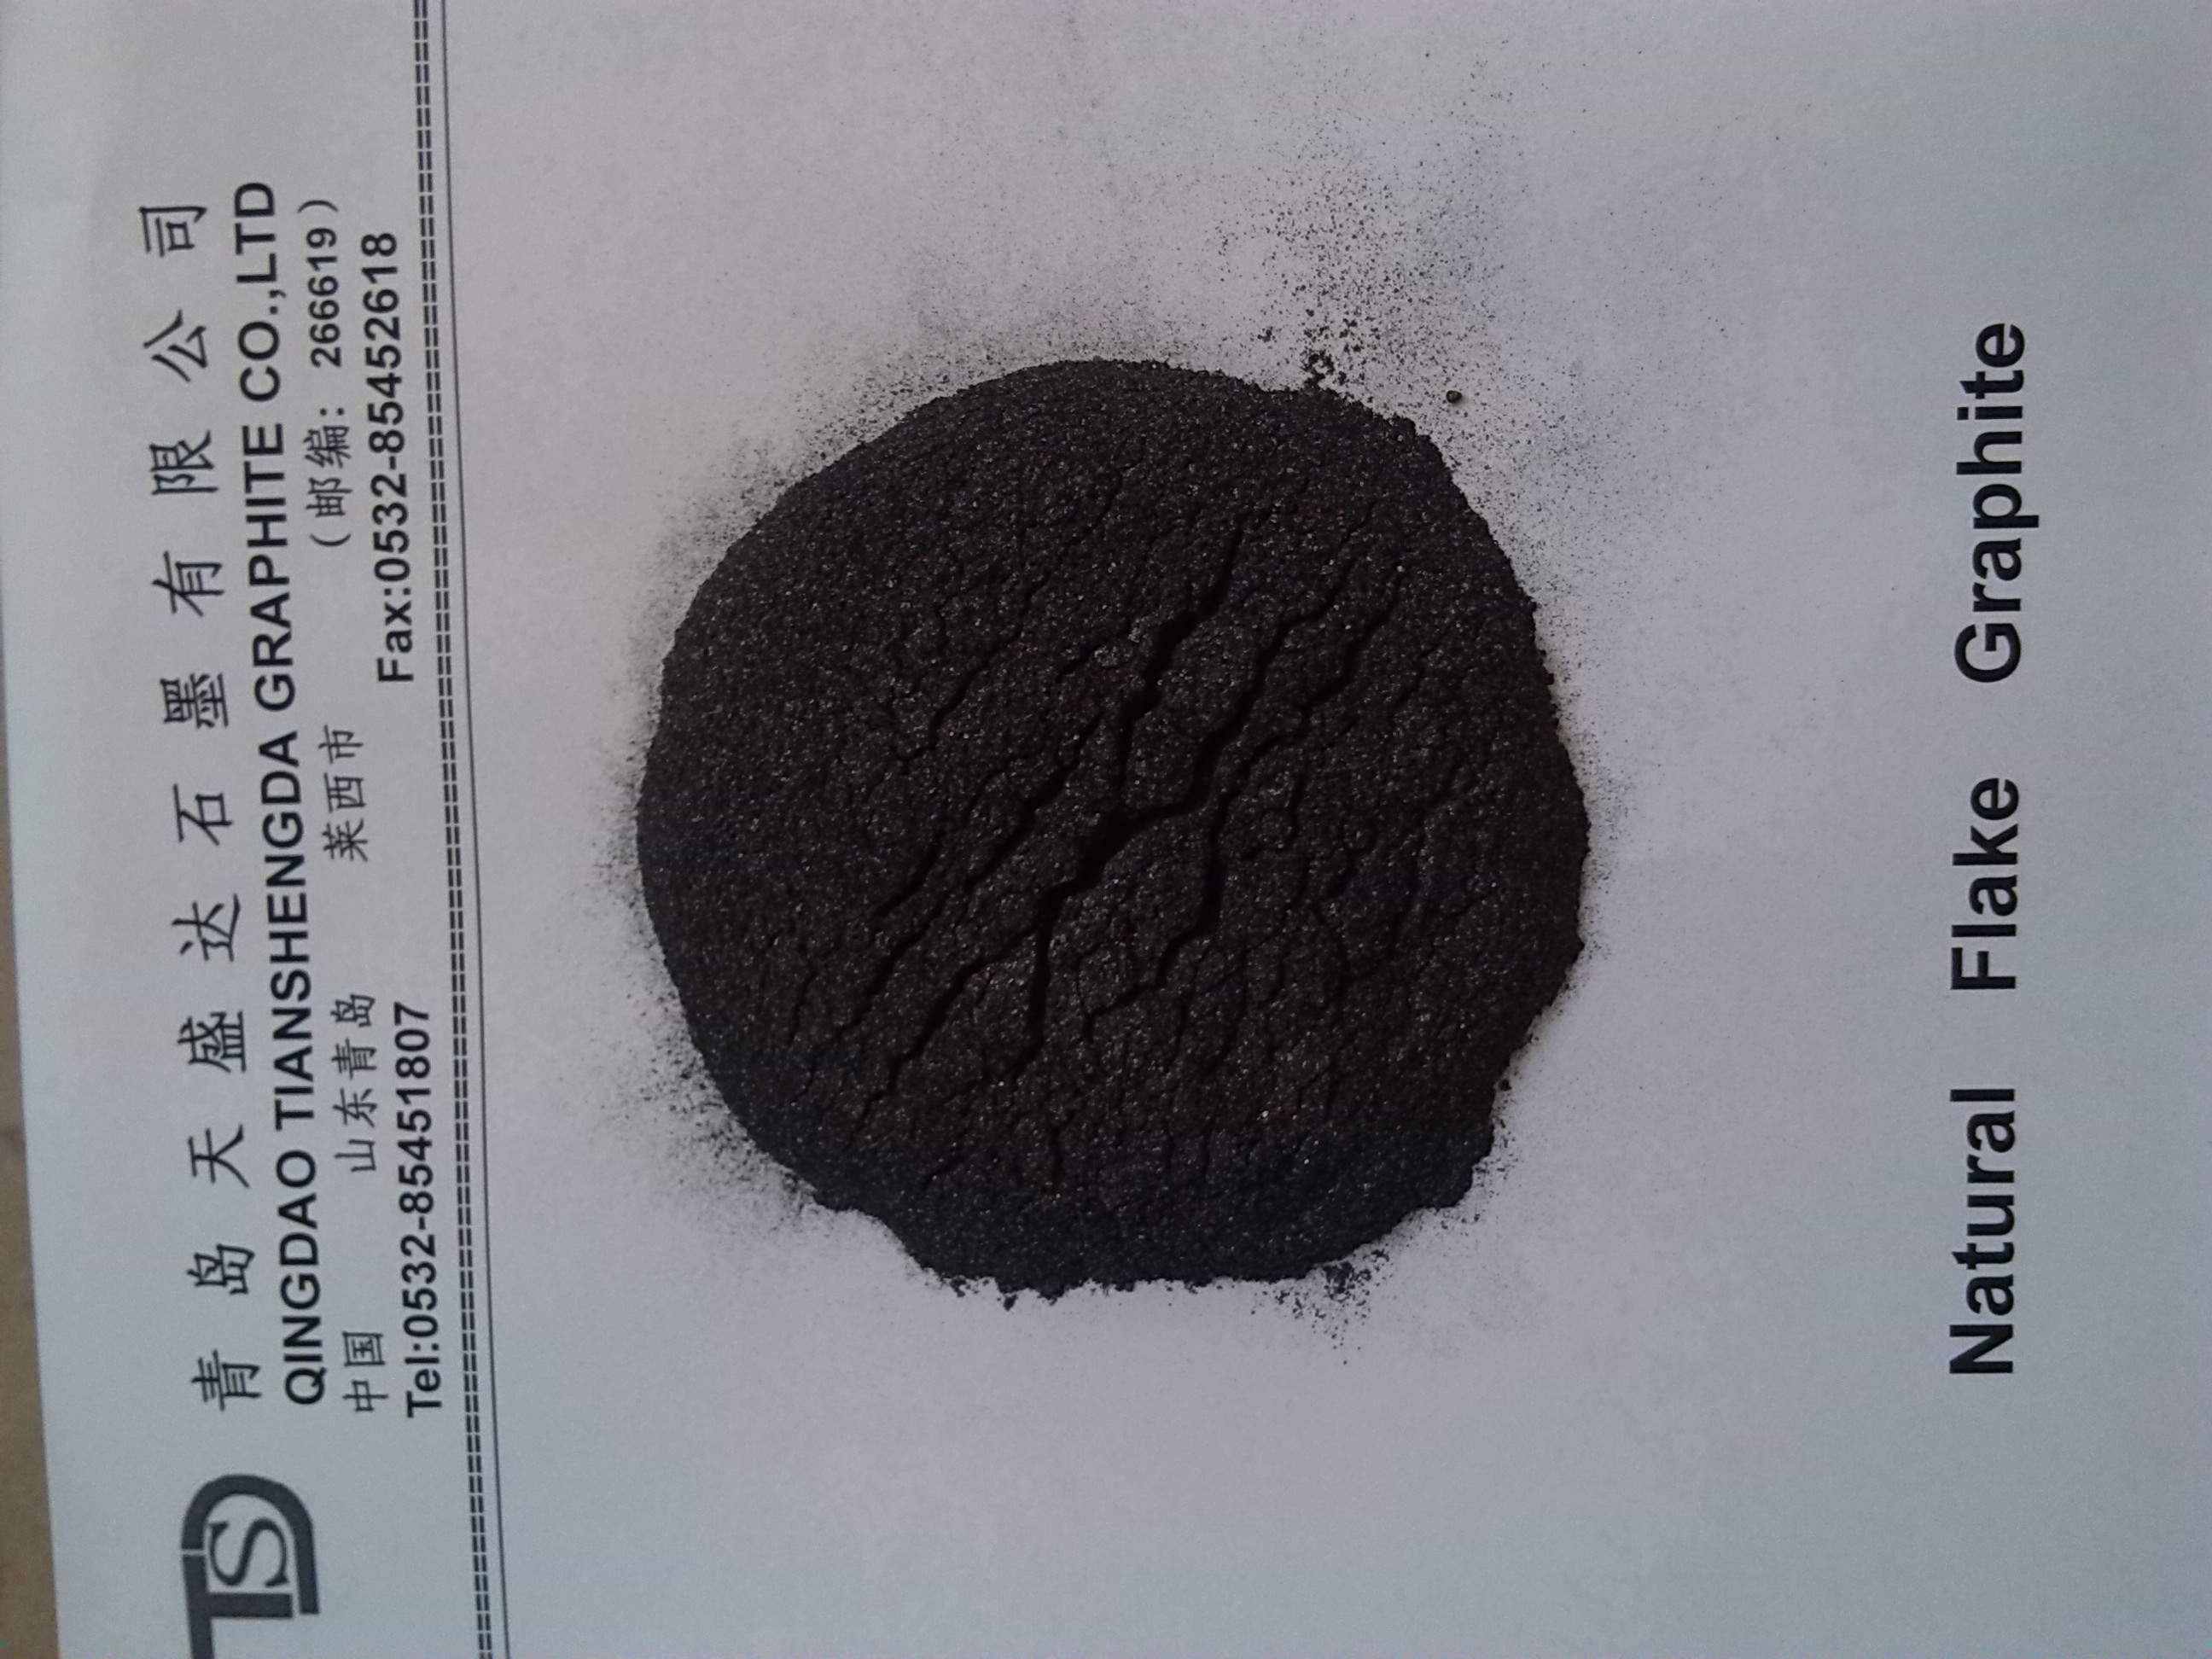 Graphite powder exclusively used for friction material /